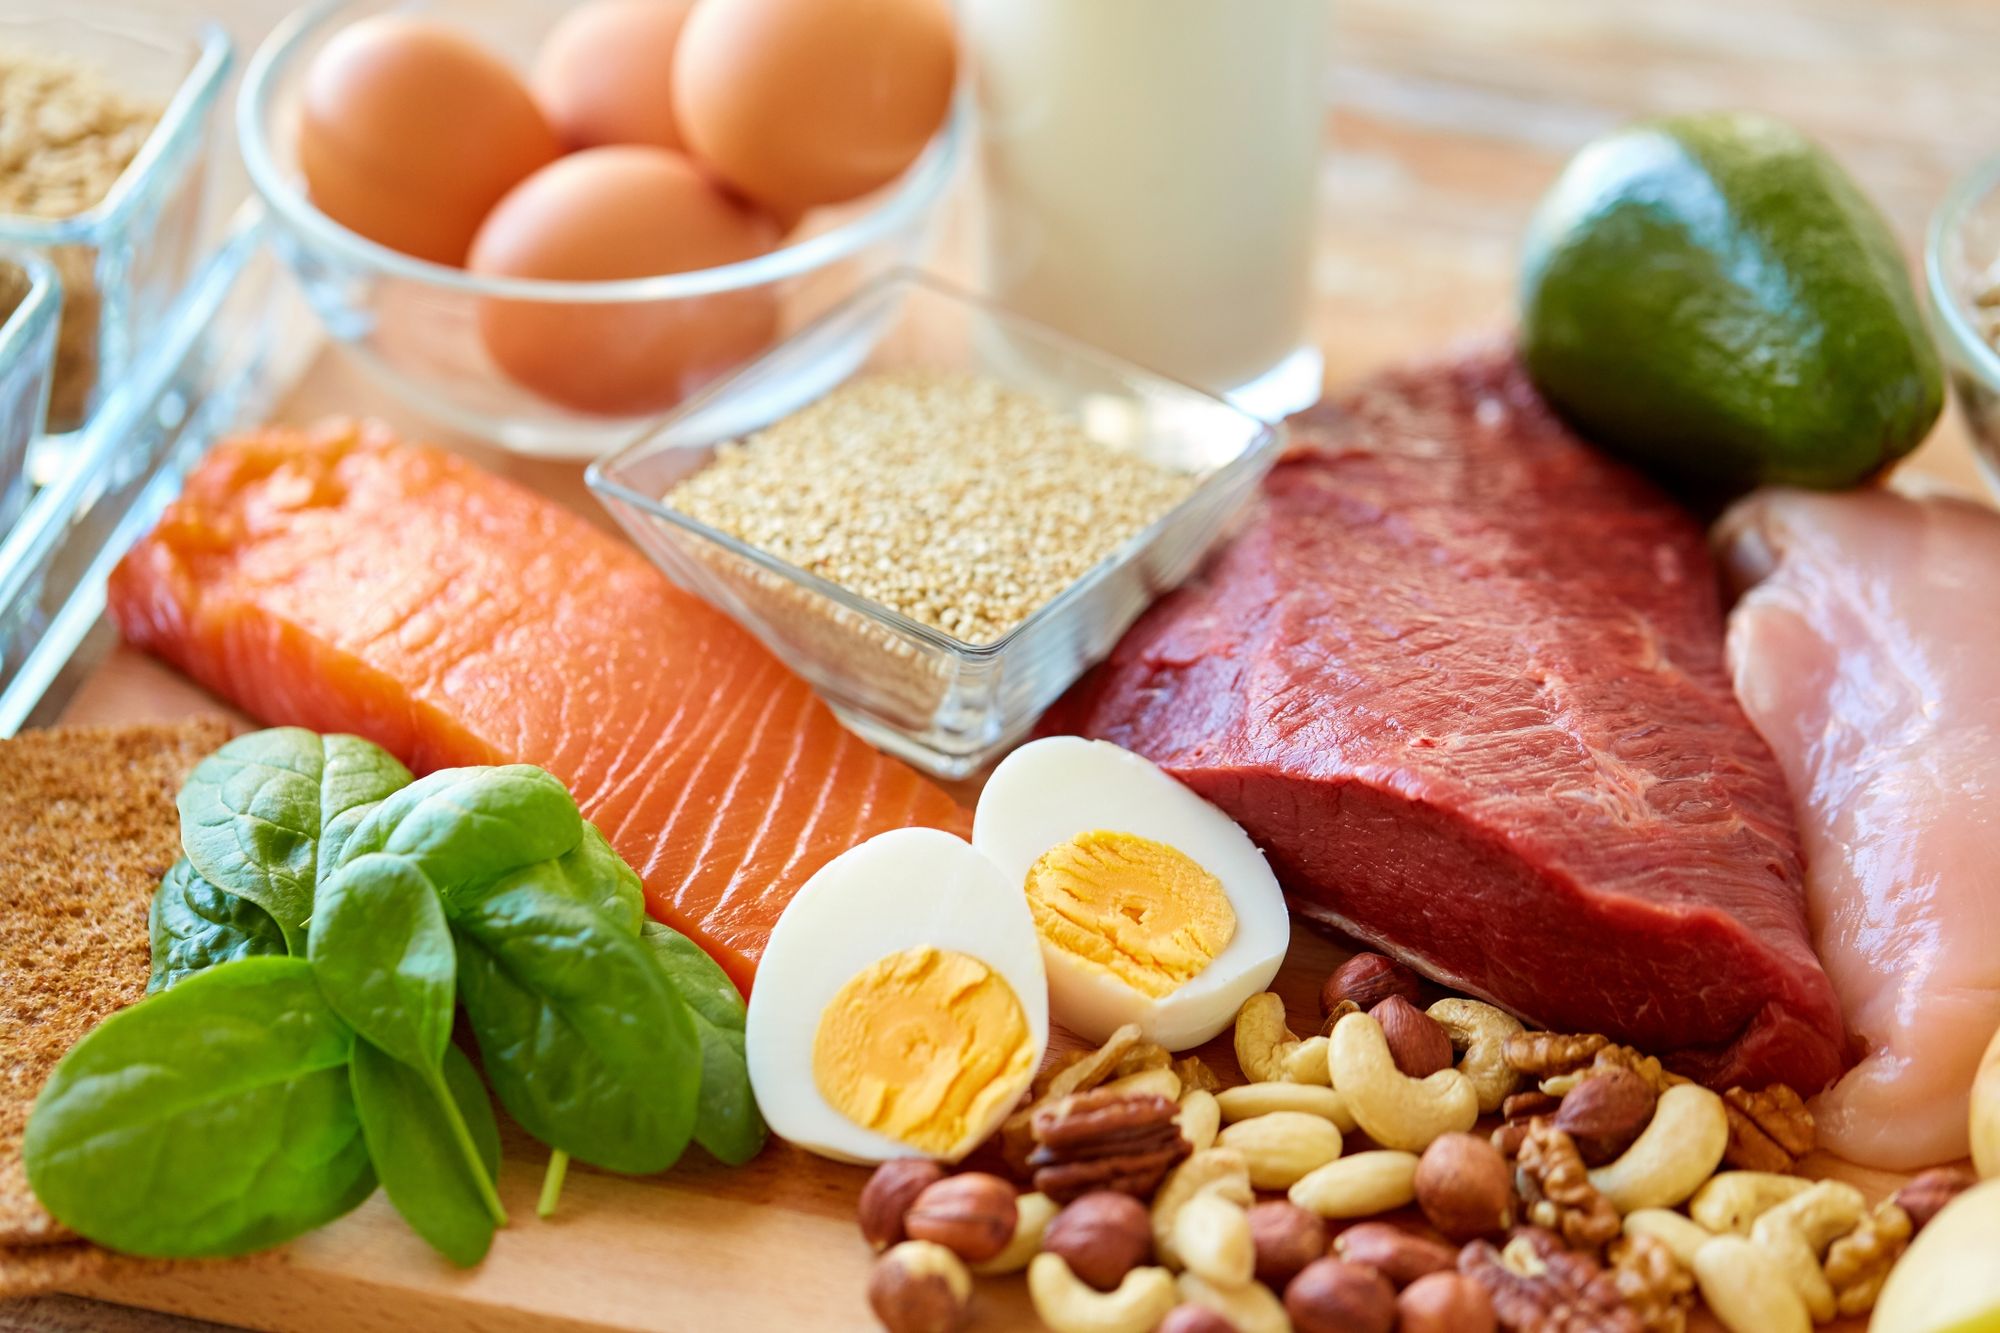 Protein Rich Foods By Syda Productions | www.shutterstock.com